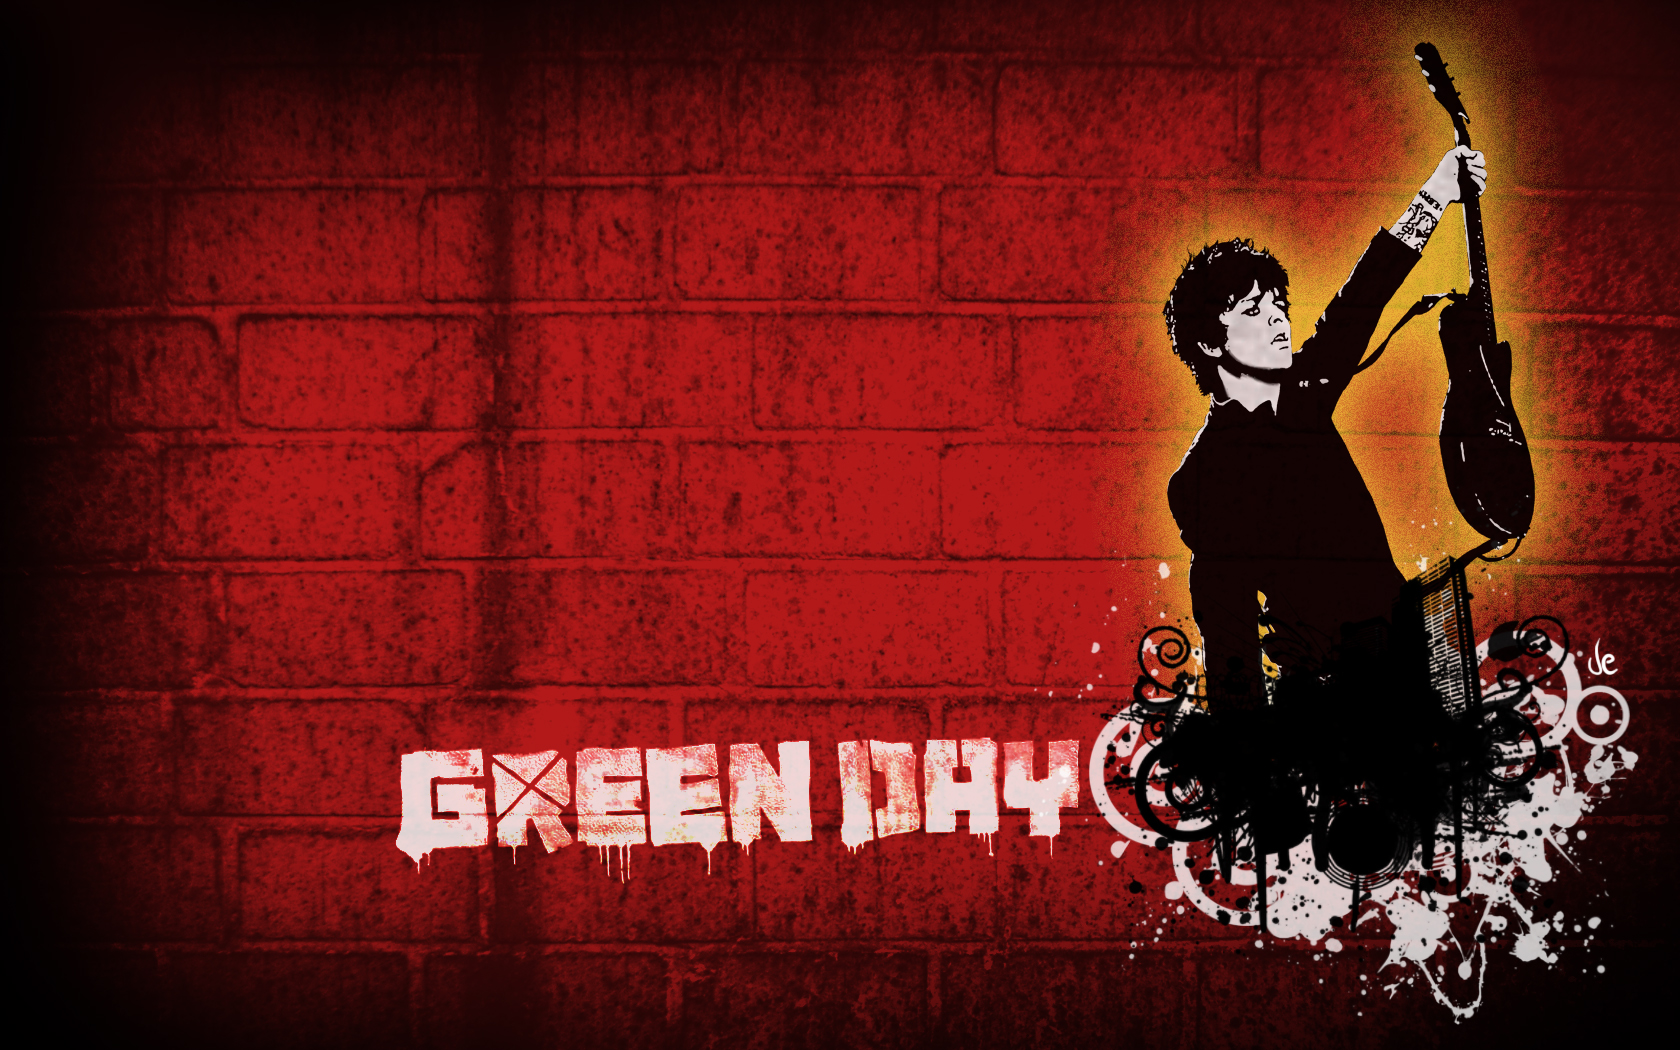 Top 999+ Green Day Wallpaper Full HD, 4K✓Free to Use